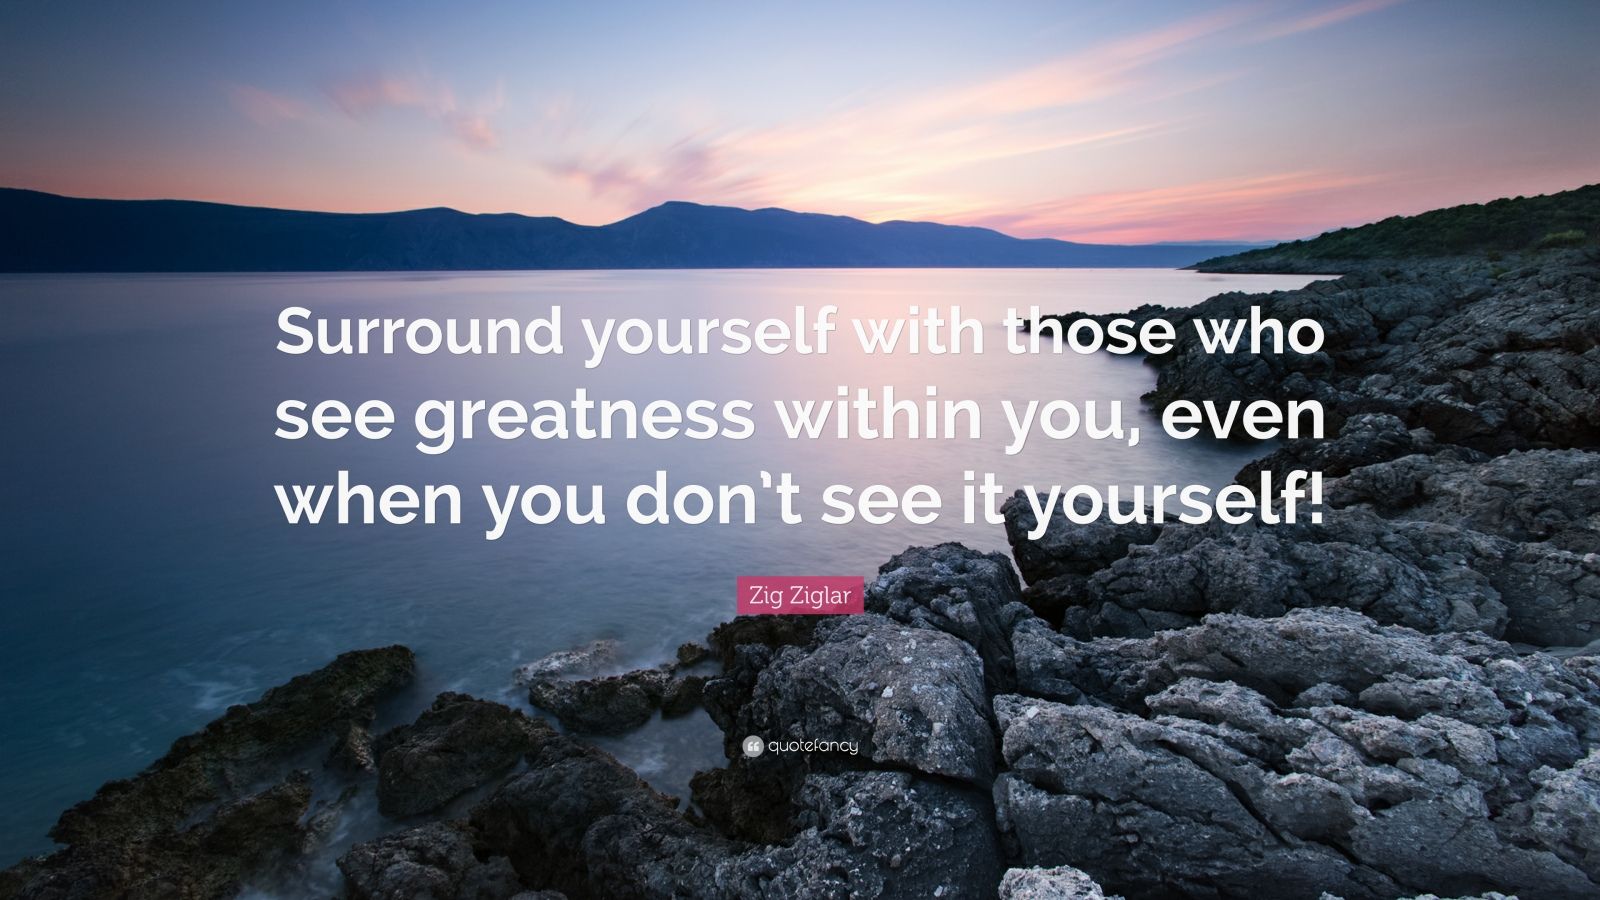 Zig Ziglar Quote: “Surround yourself with those who see greatness within you, even when you don't see it yourself!”